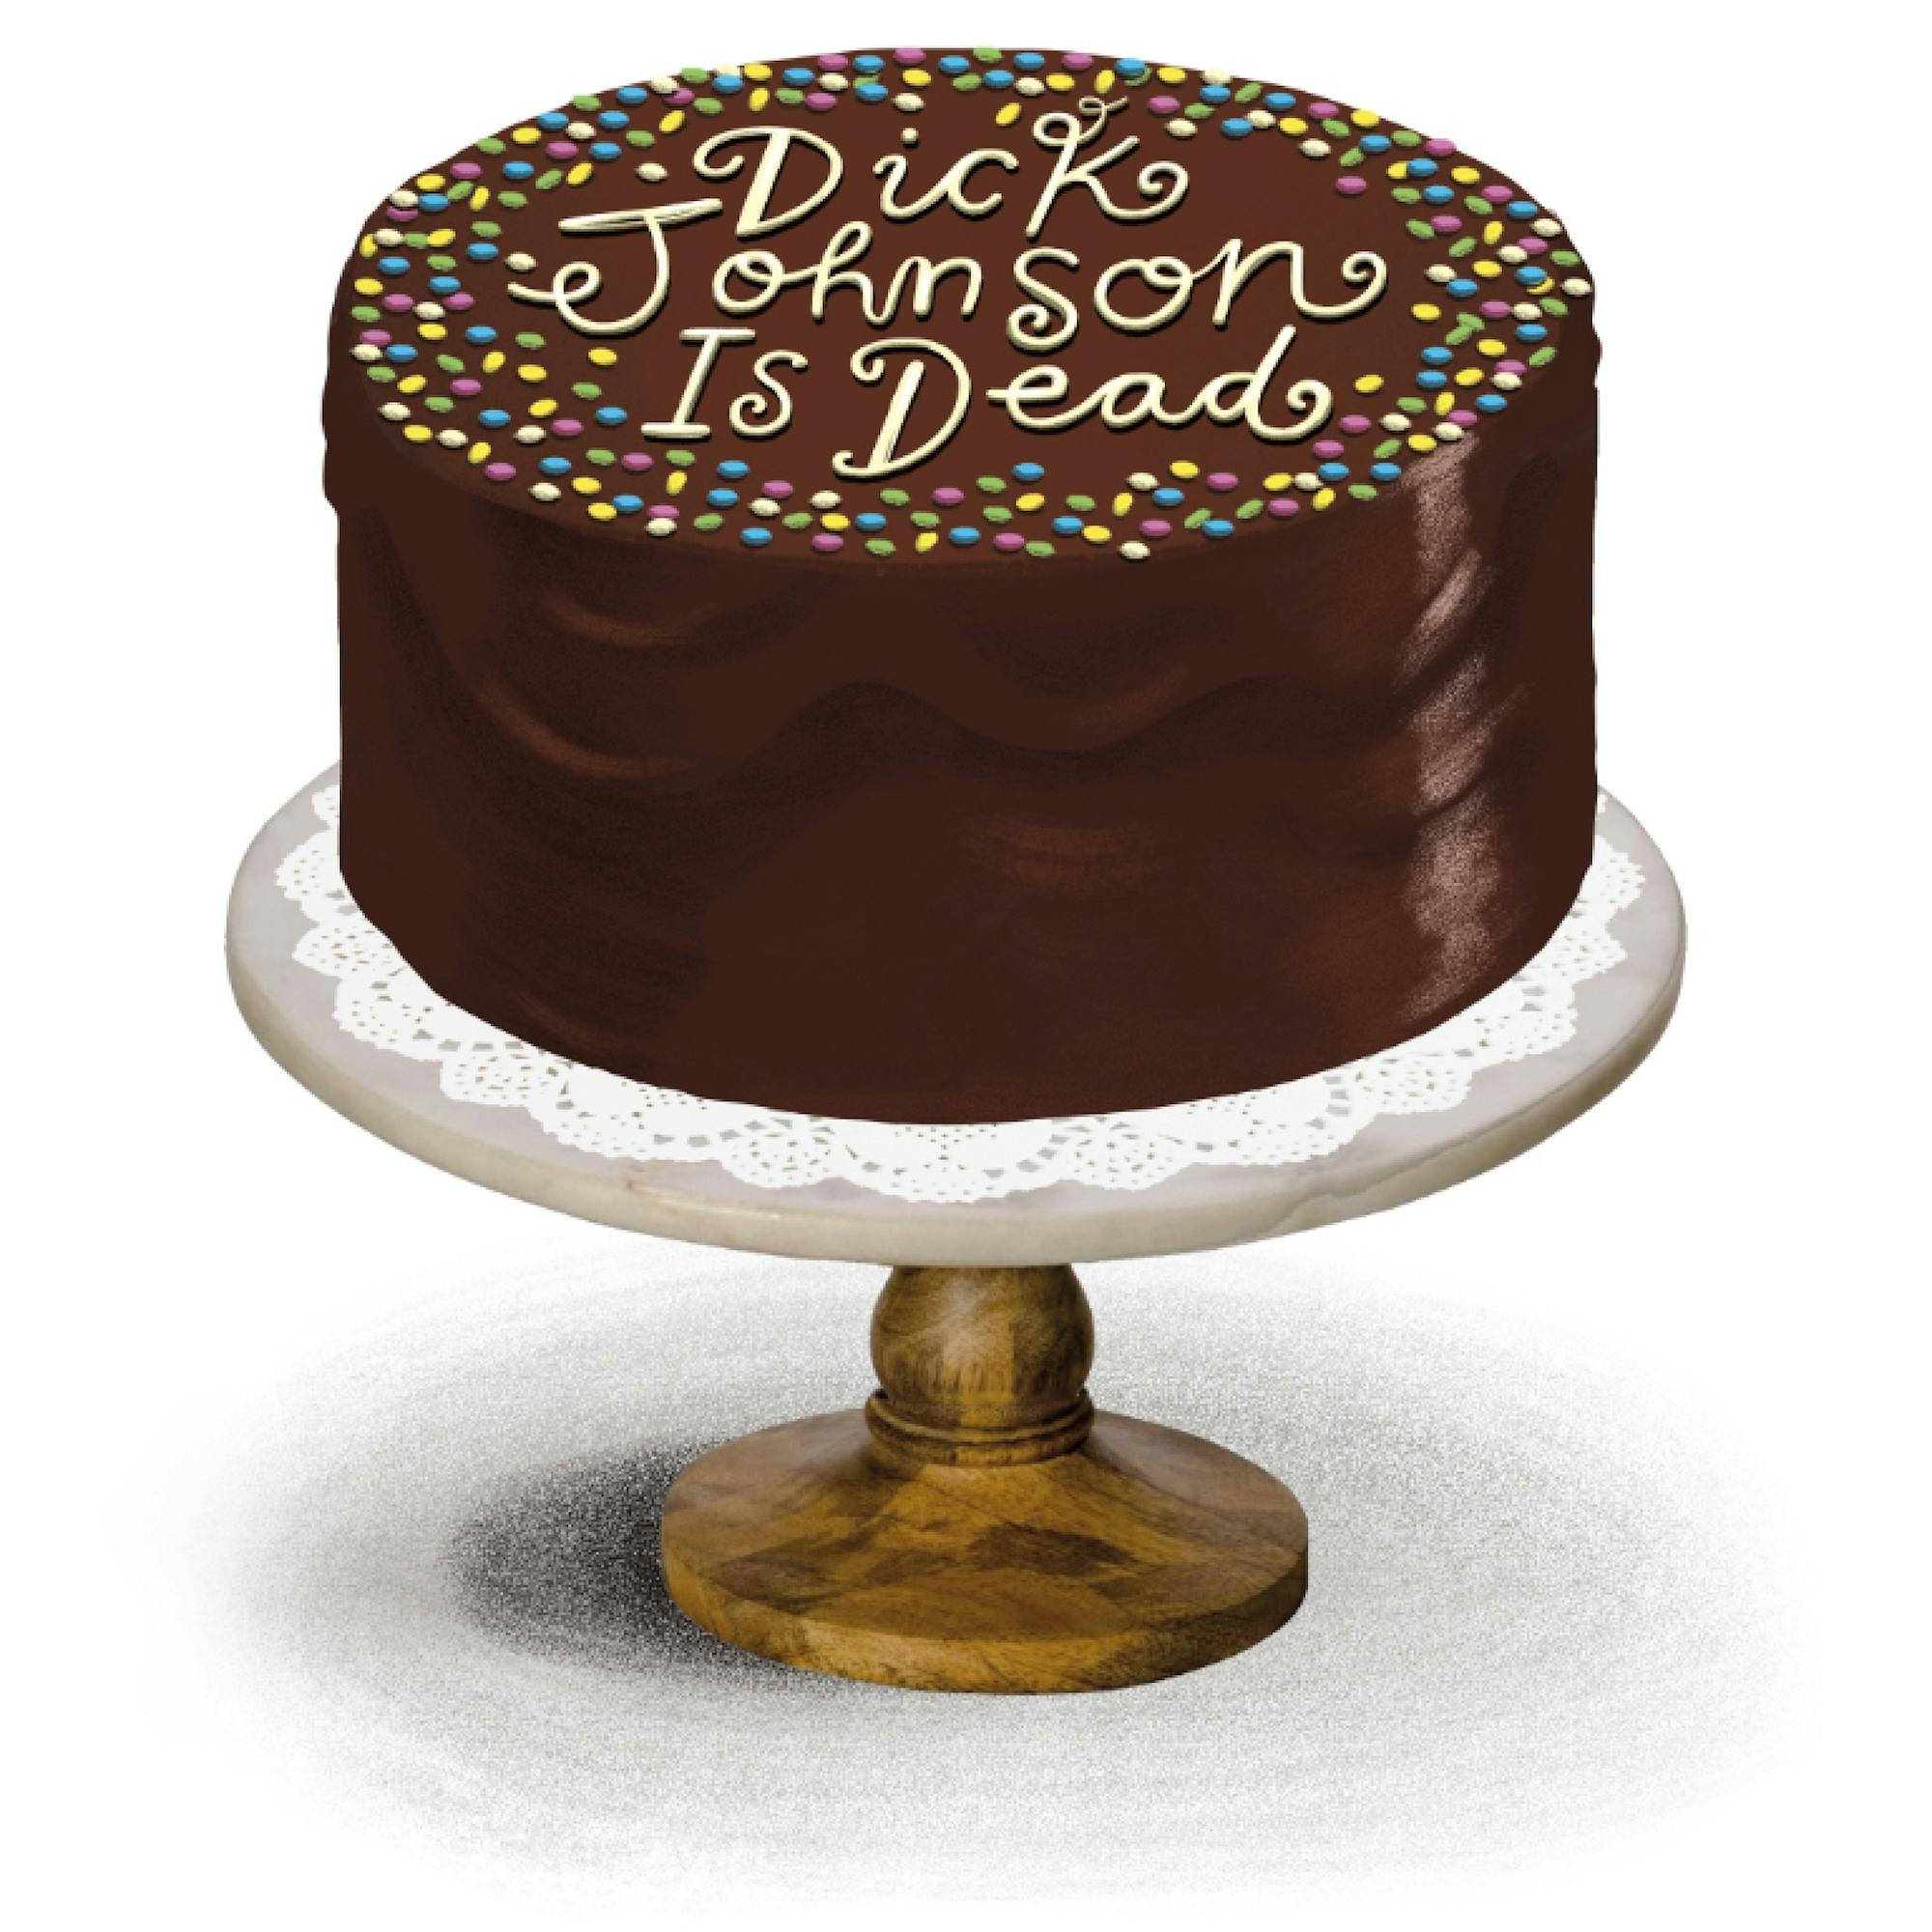 Illustration by Barry Falls of Joanne’s famous “Death Wish” chocolate cake. It sits on a cake stand, lined with a doily. Icing words on the top read: Dick Johnson Is Dead.